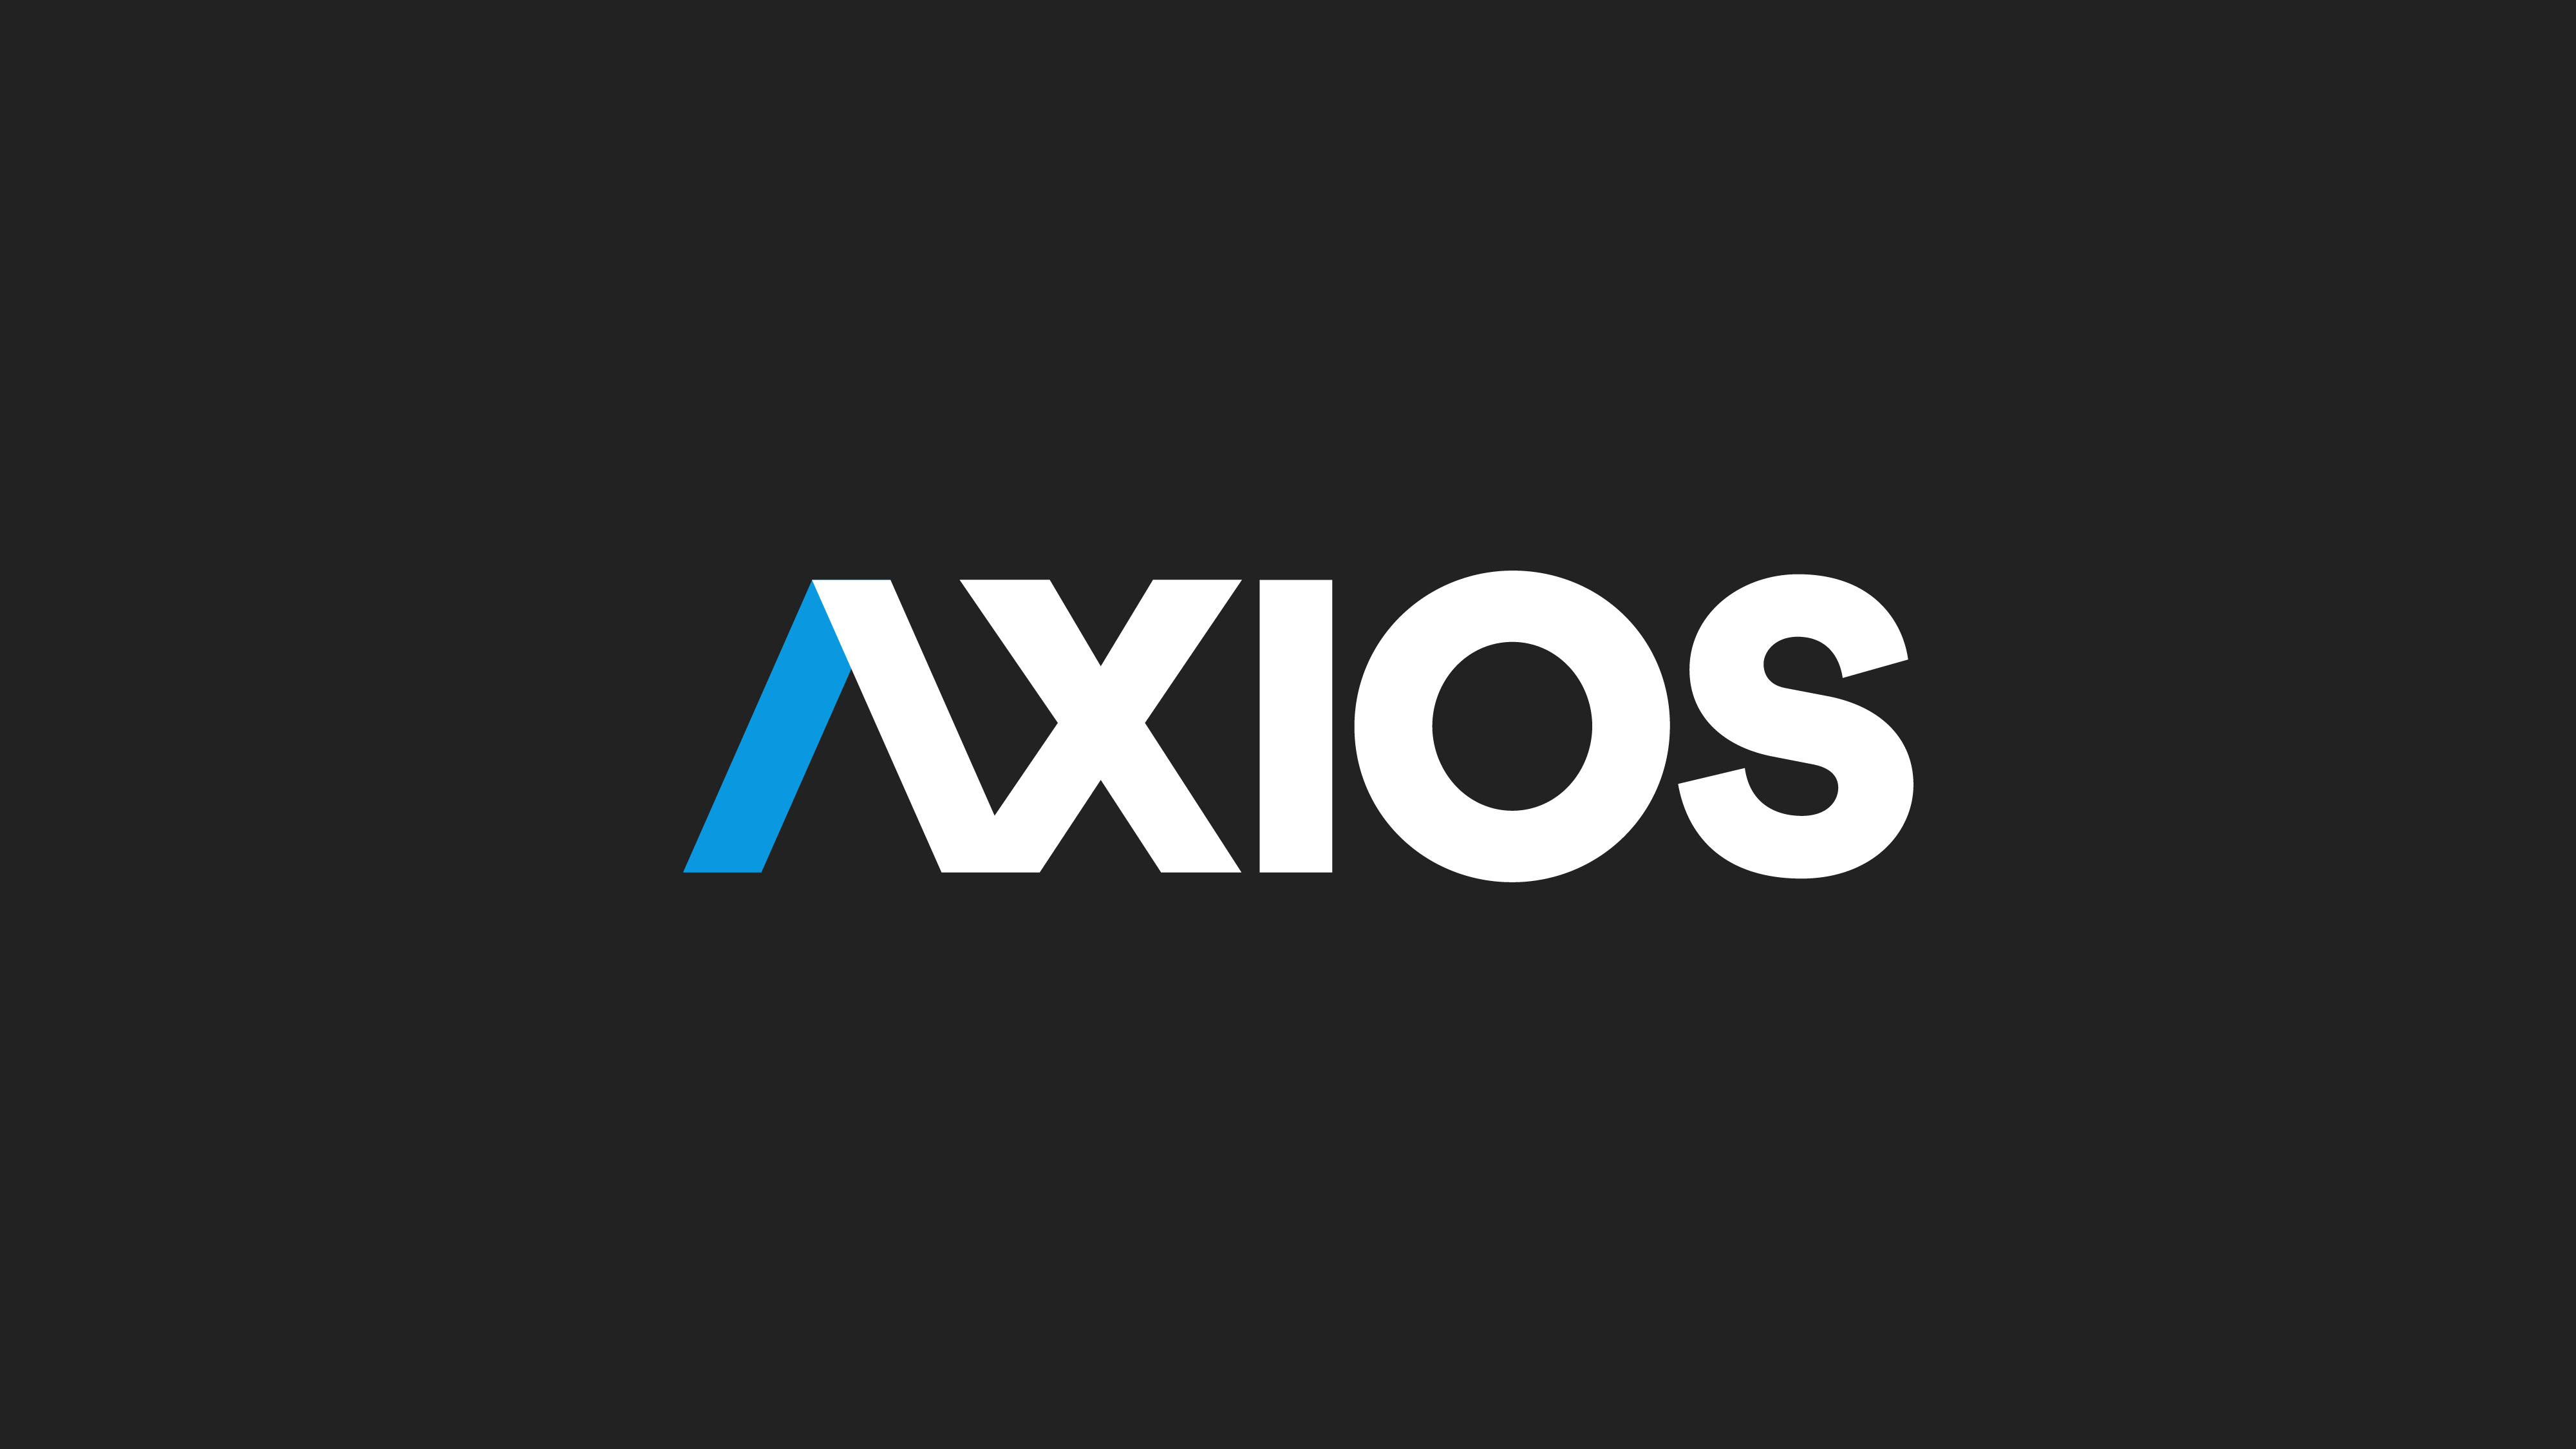 Axios - Breaking news, U.S. news and politics, and local news